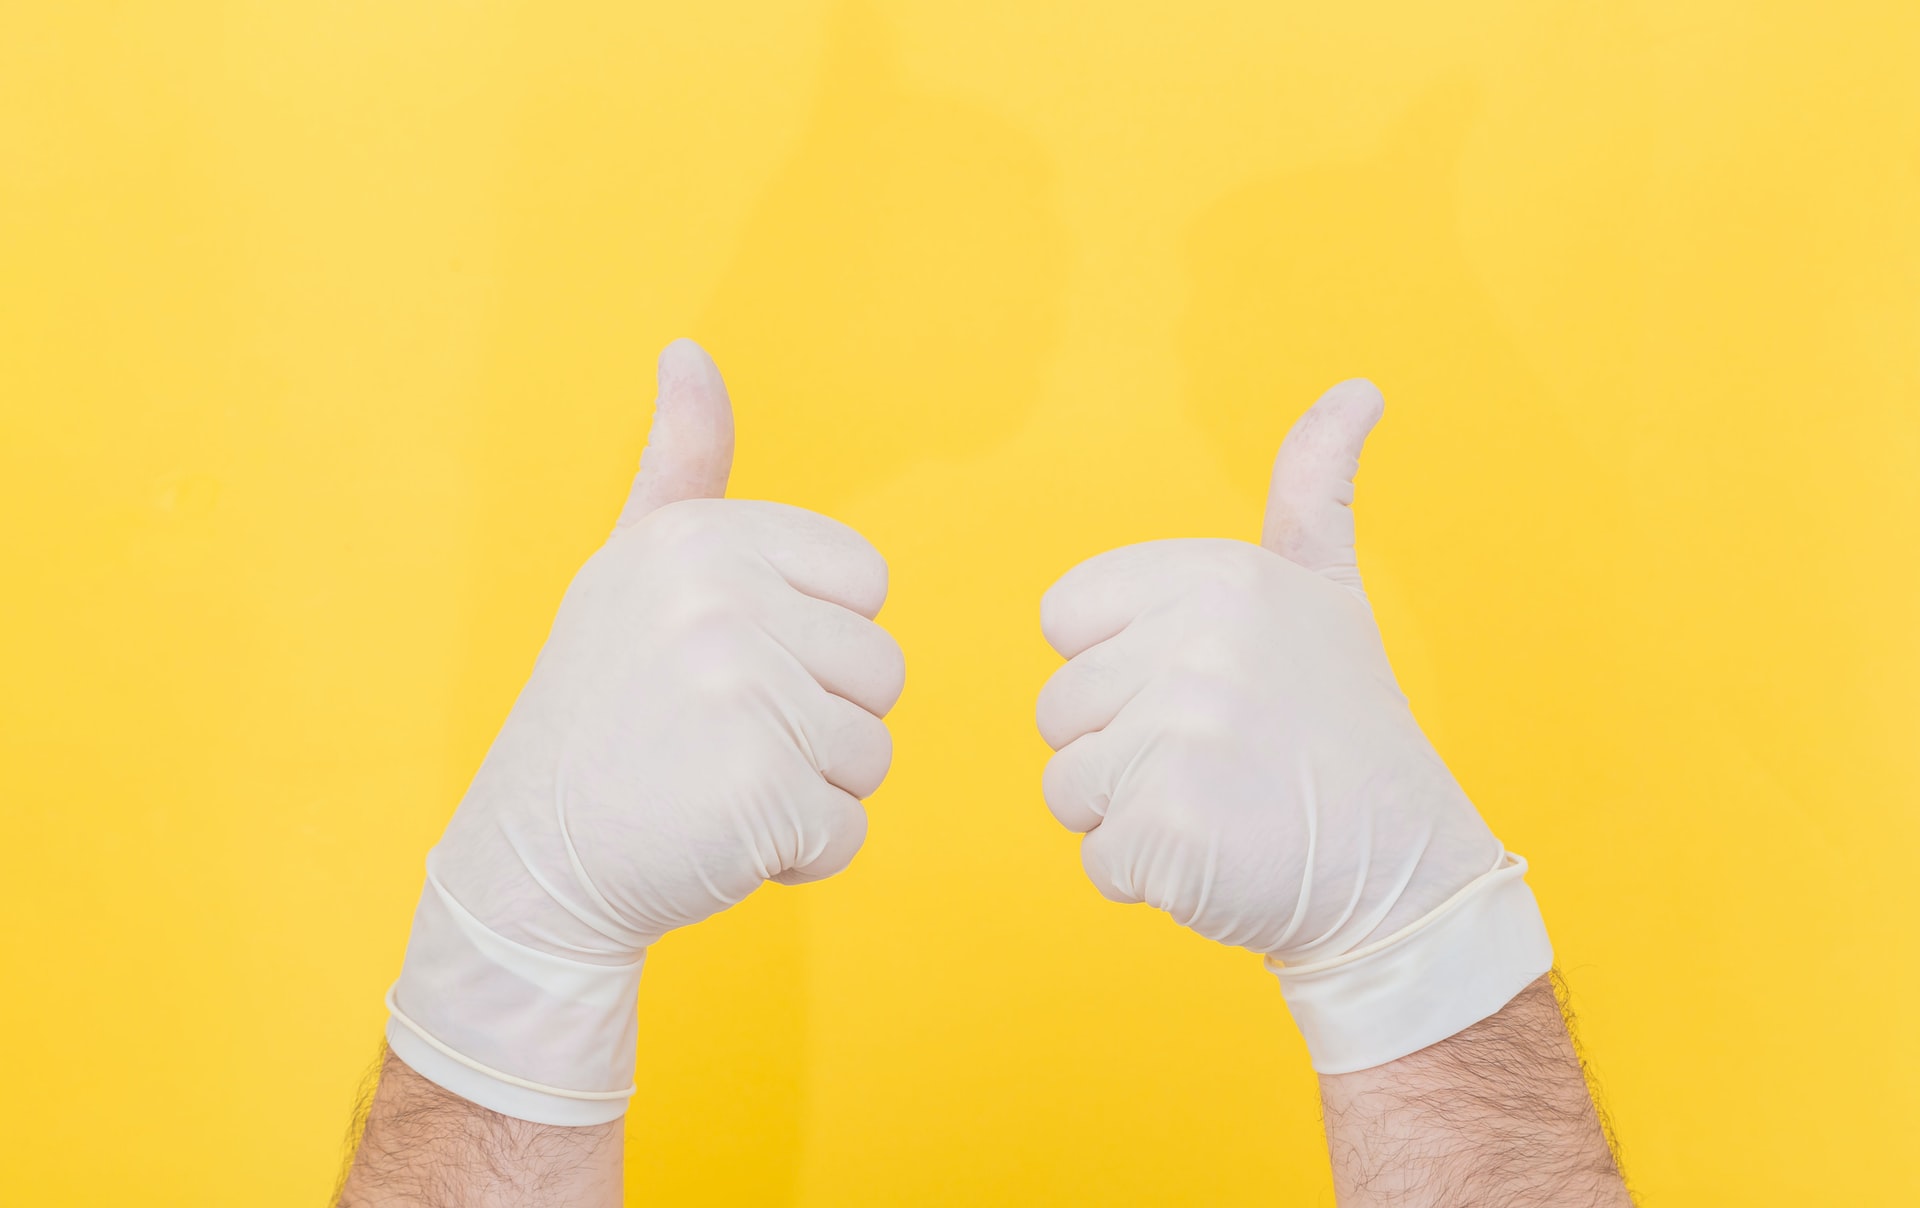 Two hands covered in latex gloves on a yellow background